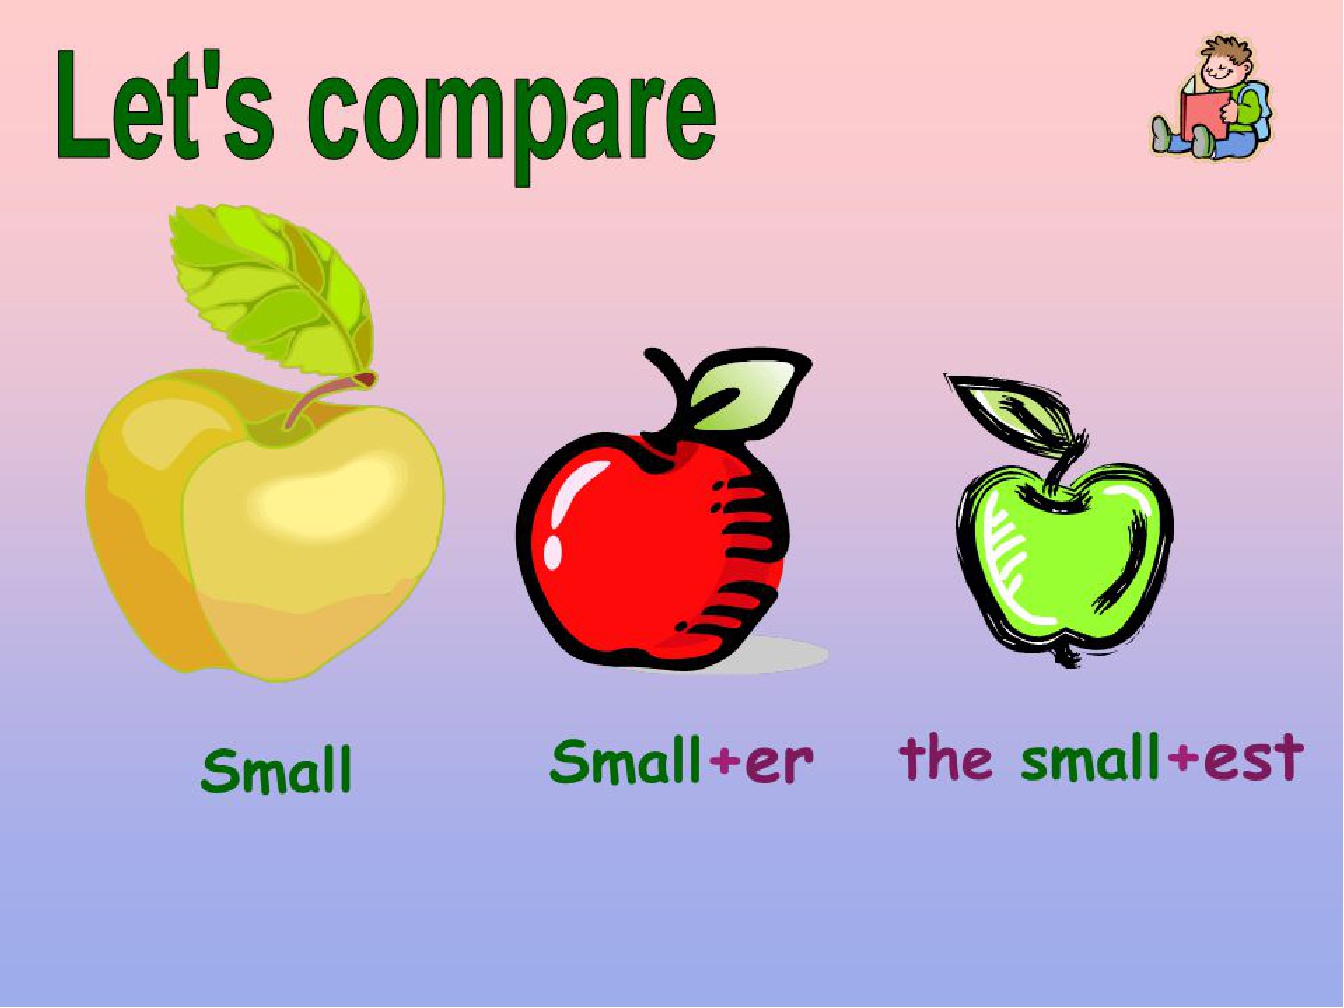 Slow comparative. Degrees of Comparison of adjectives. Comparison of adjectives. Comparison картинка. Degrees of Comparison картинки.